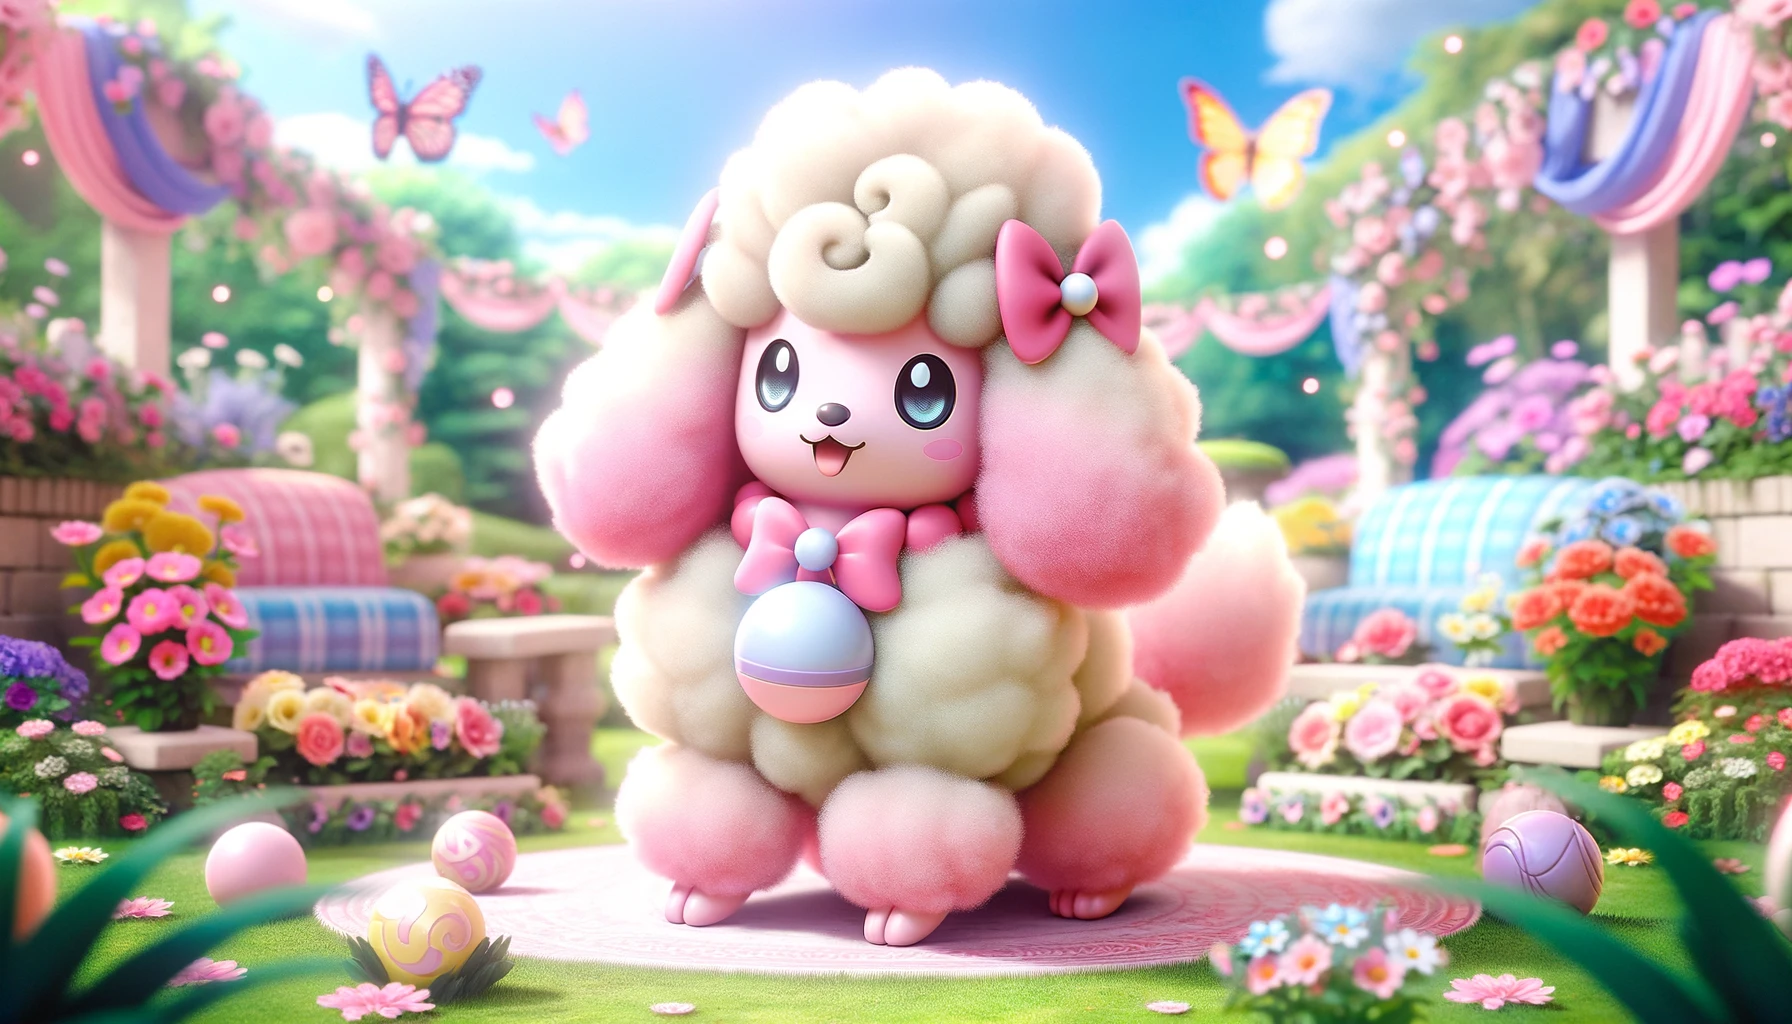 A charming image of a fictional poodle-like Pokémon, resembling Furfrou, named Trimmian. This Trimmian has fluffy, cotton candy pink fur styled into an adorable, intricate trim that includes curls and bows, giving it a very endearing appearance. It is sitting in a beautifully decorated garden, surrounded by colorful flowers and butterflies, under a sunny sky. The setting is idyllic and playful, enhancing the cute and magical vibe of Trimmian, making it appear incredibly lovable and appealing.